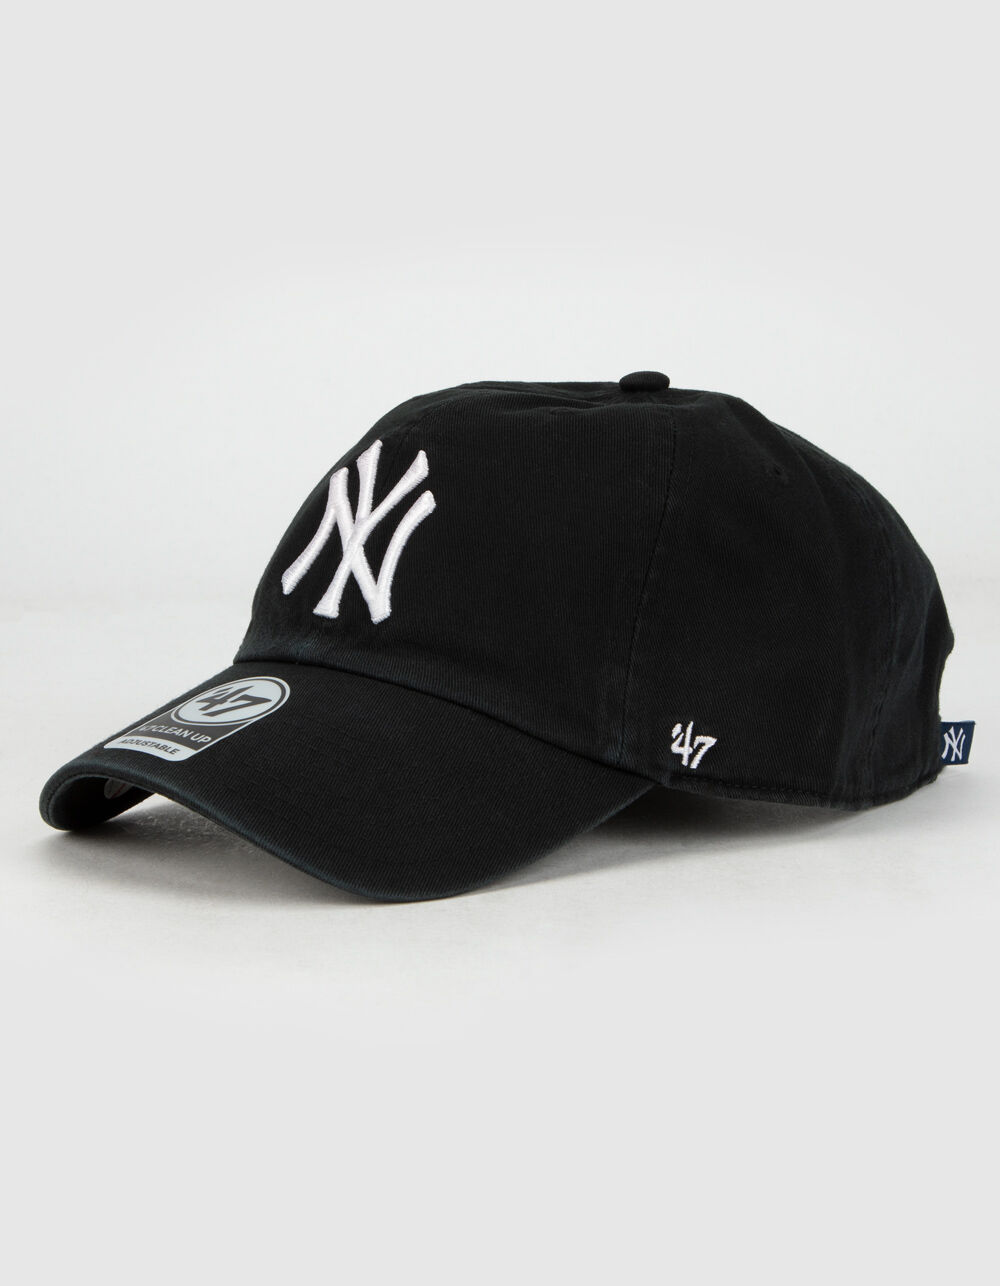 Official New York Yankees '47 Brand Gear, '47 Brand Yankees Hats